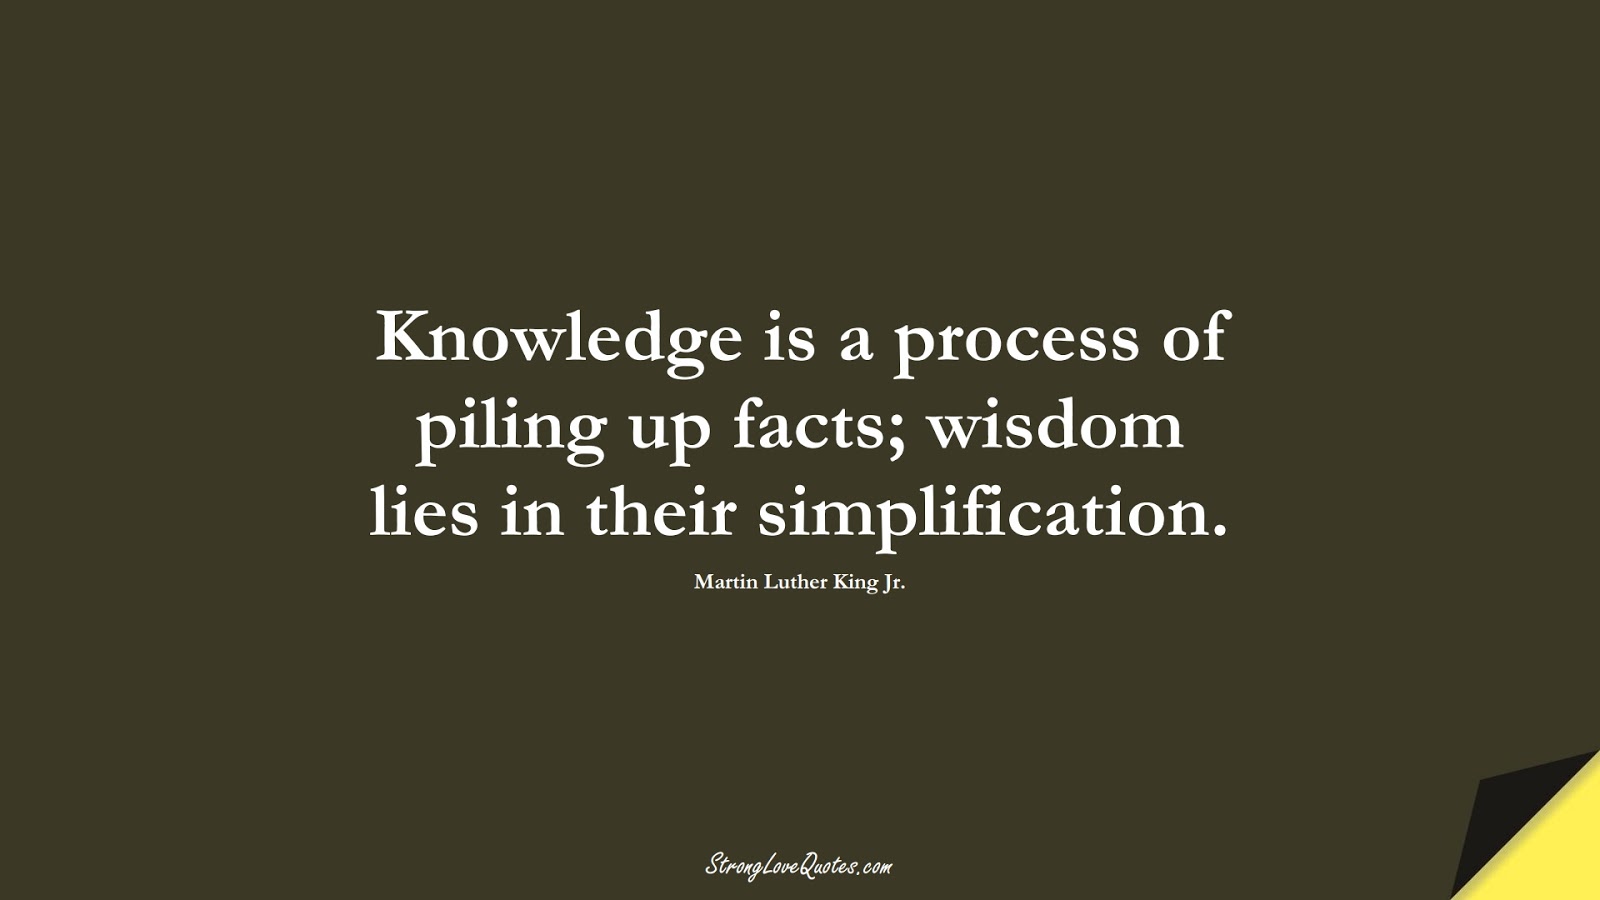 Knowledge is a process of piling up facts; wisdom lies in their simplification. (Martin Luther King Jr.);  #KnowledgeQuotes